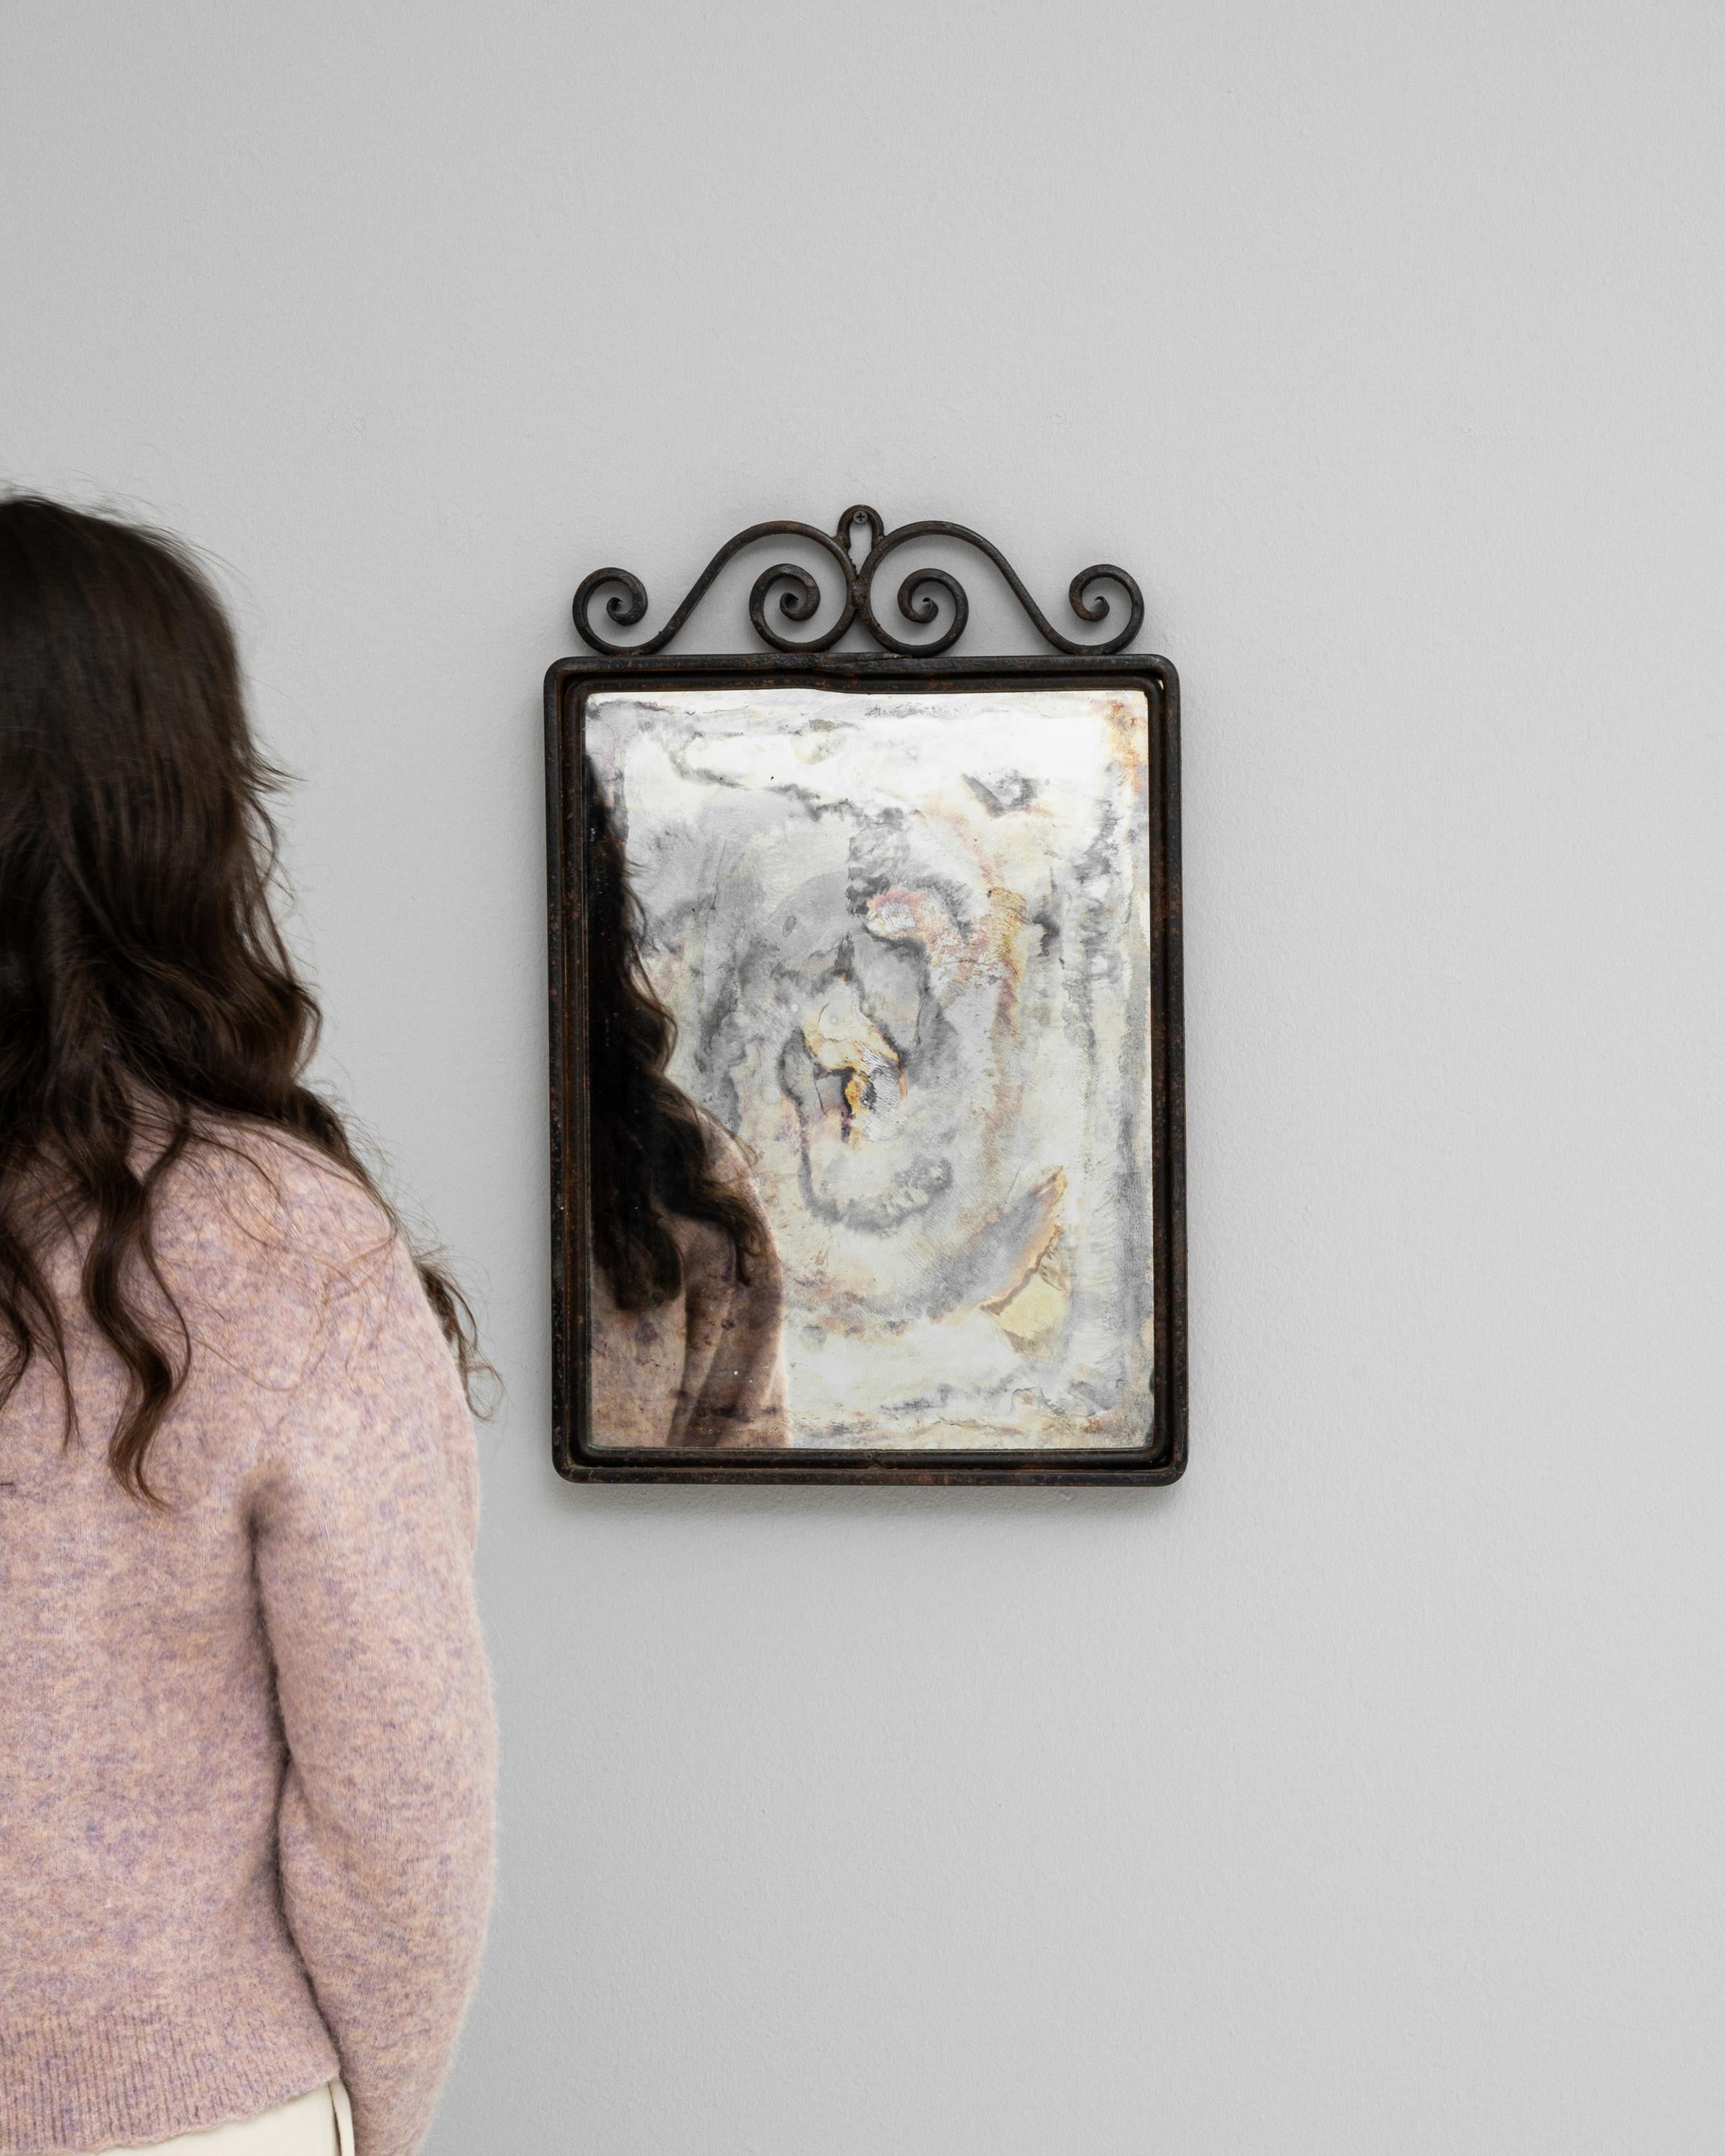 This 20th Century French Metal Mirror exudes an air of industrial chic with its minimalistic yet striking design. The simple, squared frame is crafted from metal, featuring a rich patina that tells the story of its journey through time. Adding a